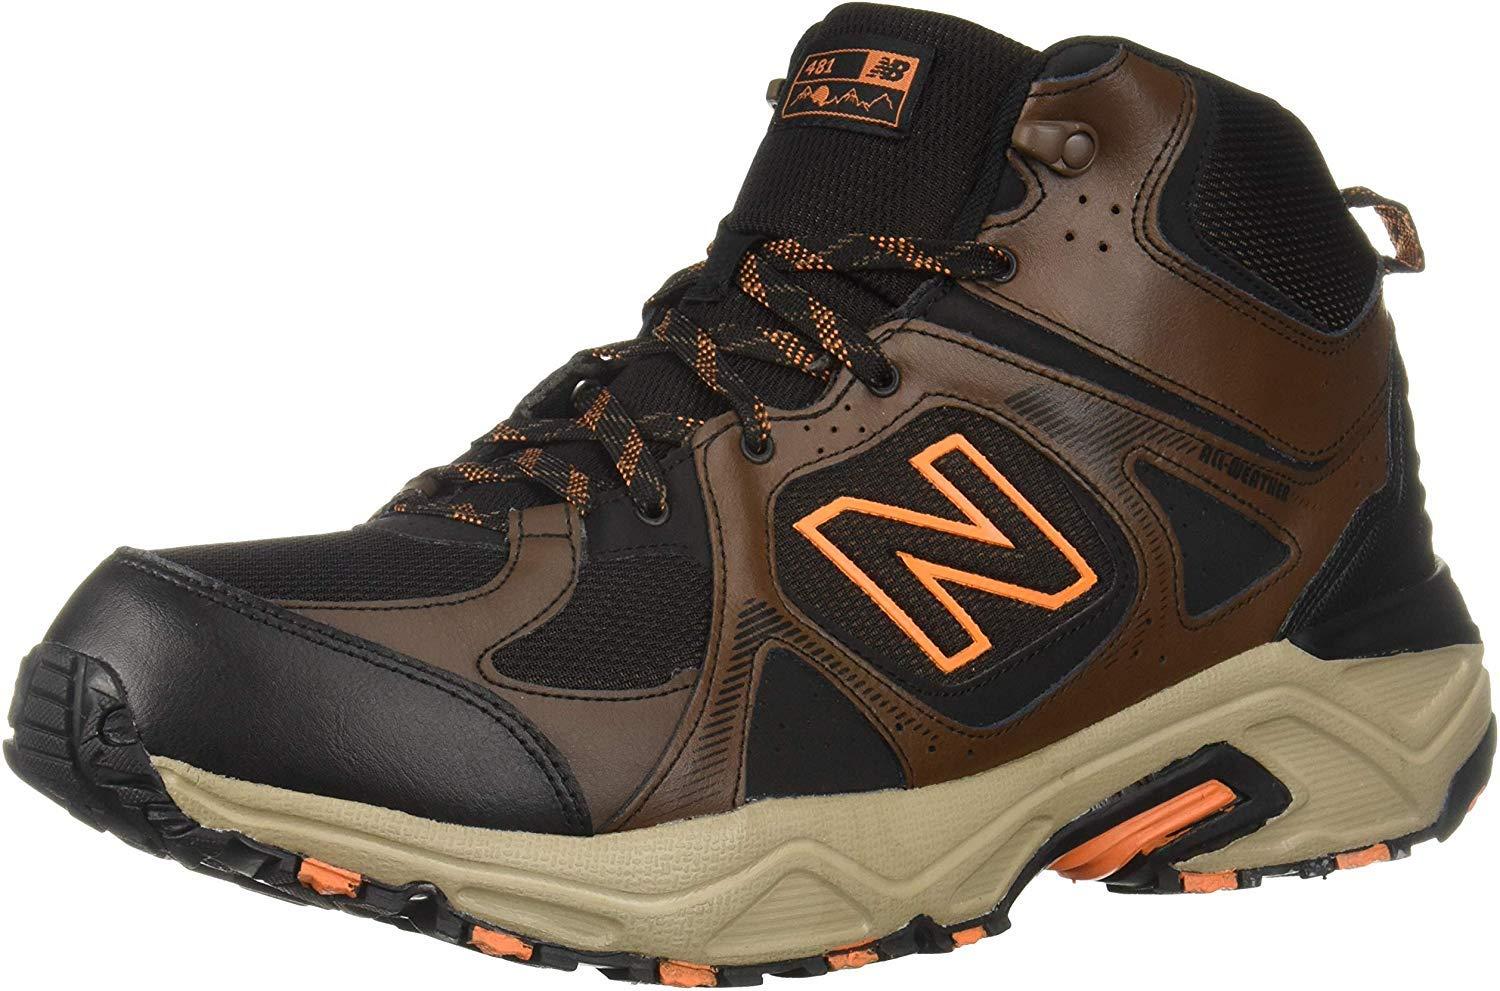 New Balance Leather 481 V3 Mid-cut Hiking Shoe in Black for Men - Lyst